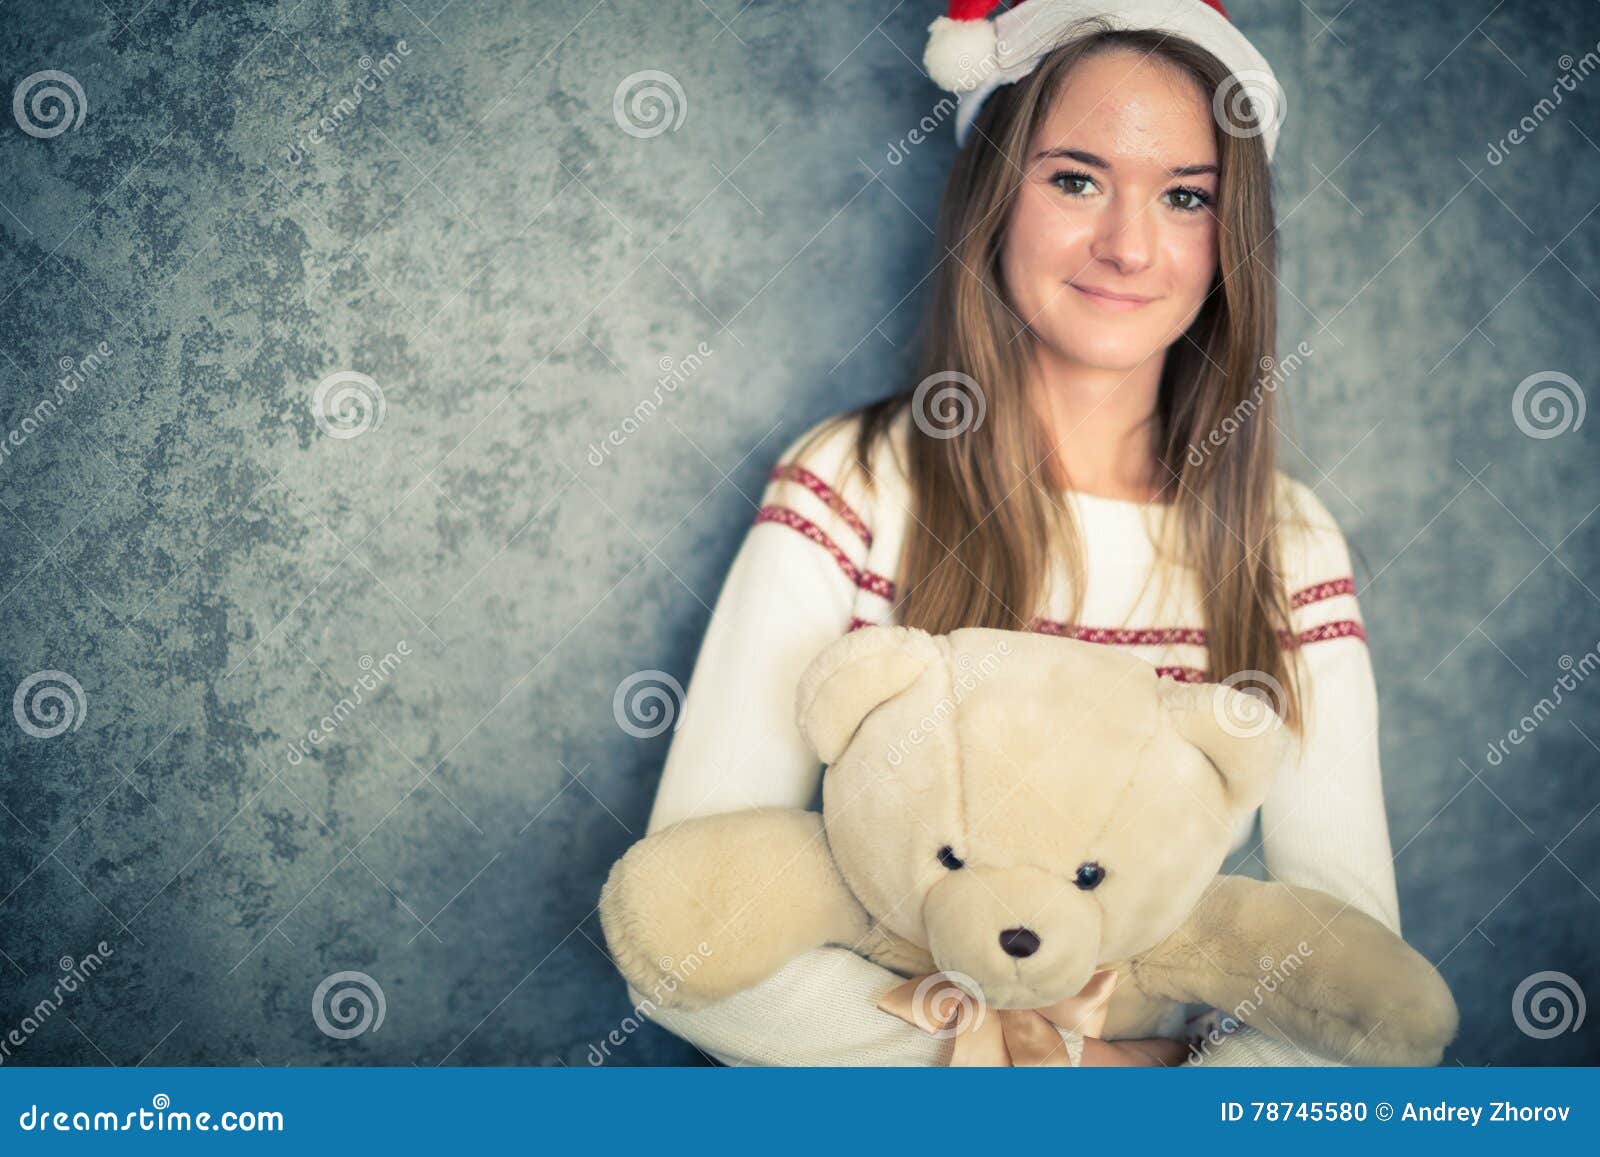 Pretty Young Woman with Teddy Bear Stock Photo - Image of beautiful ...